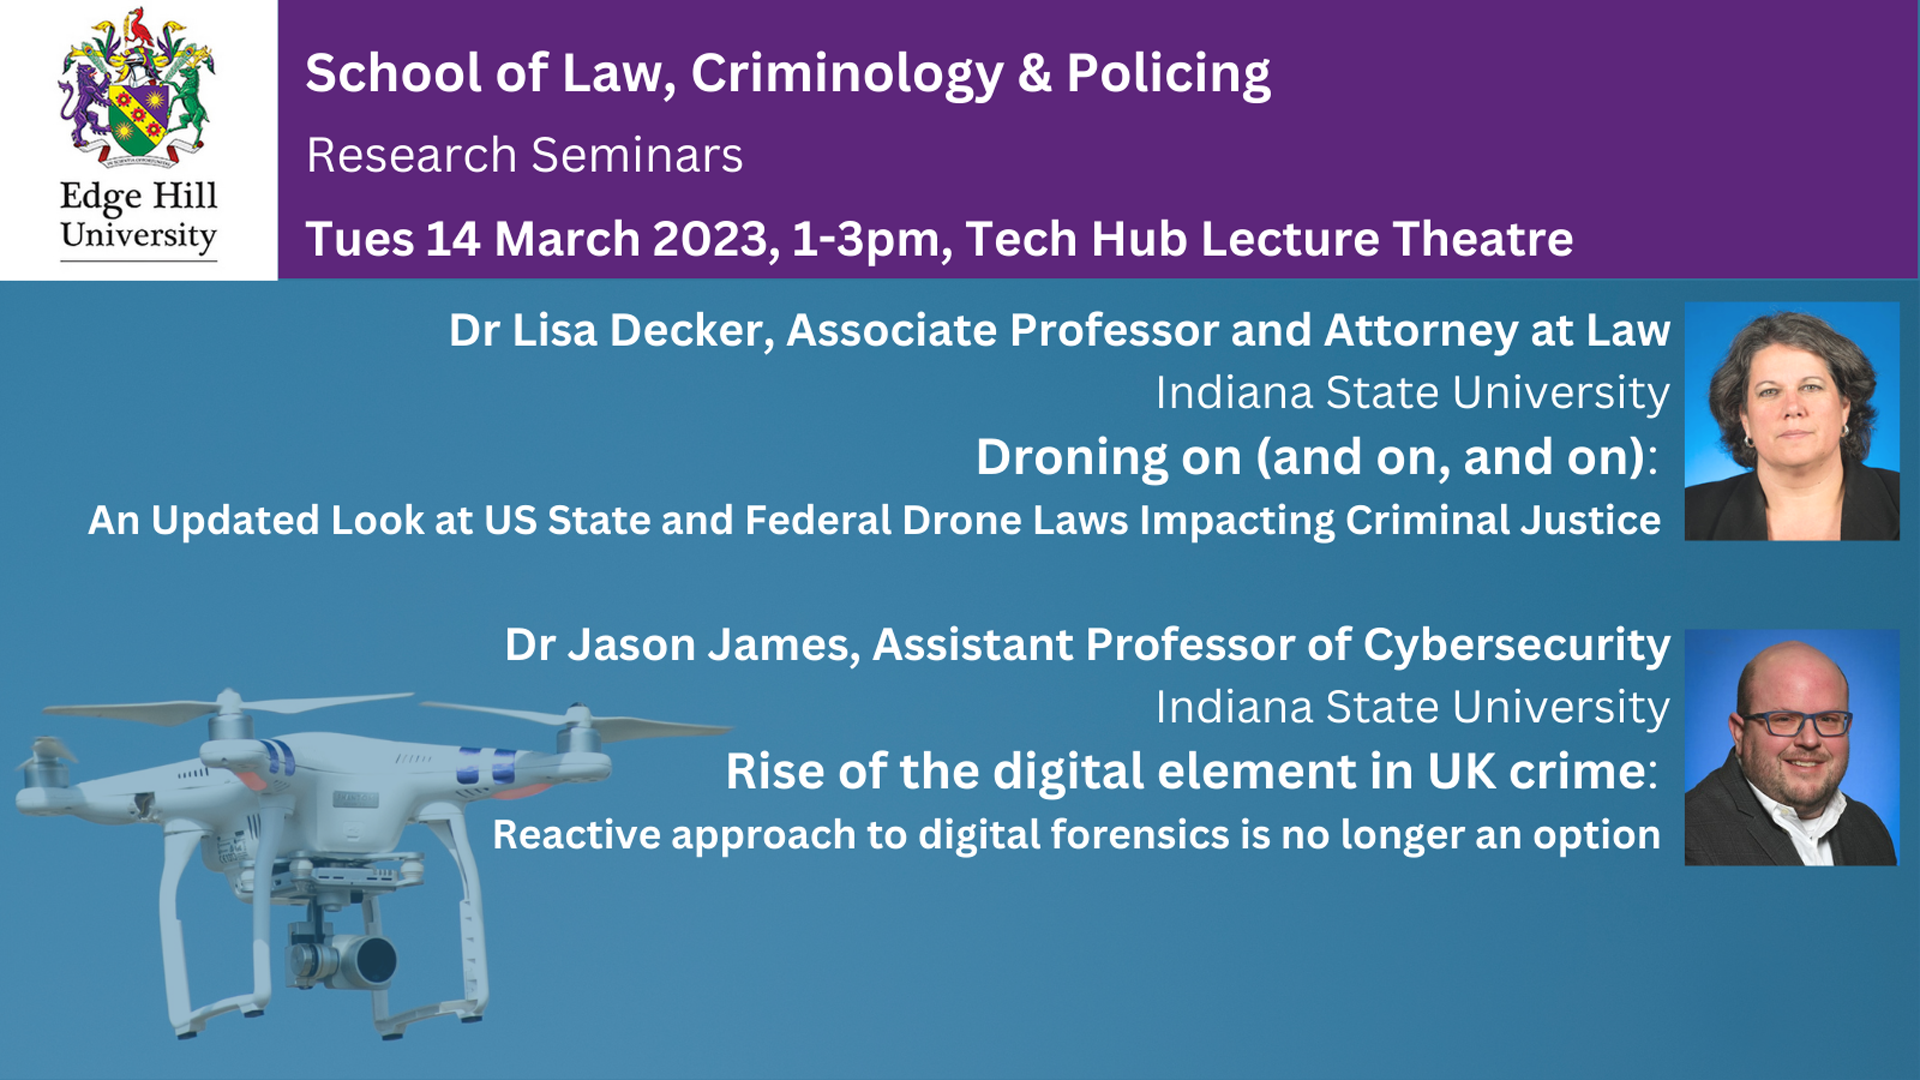 Poster advertising School of Law, Criminology and Policing research seminar series